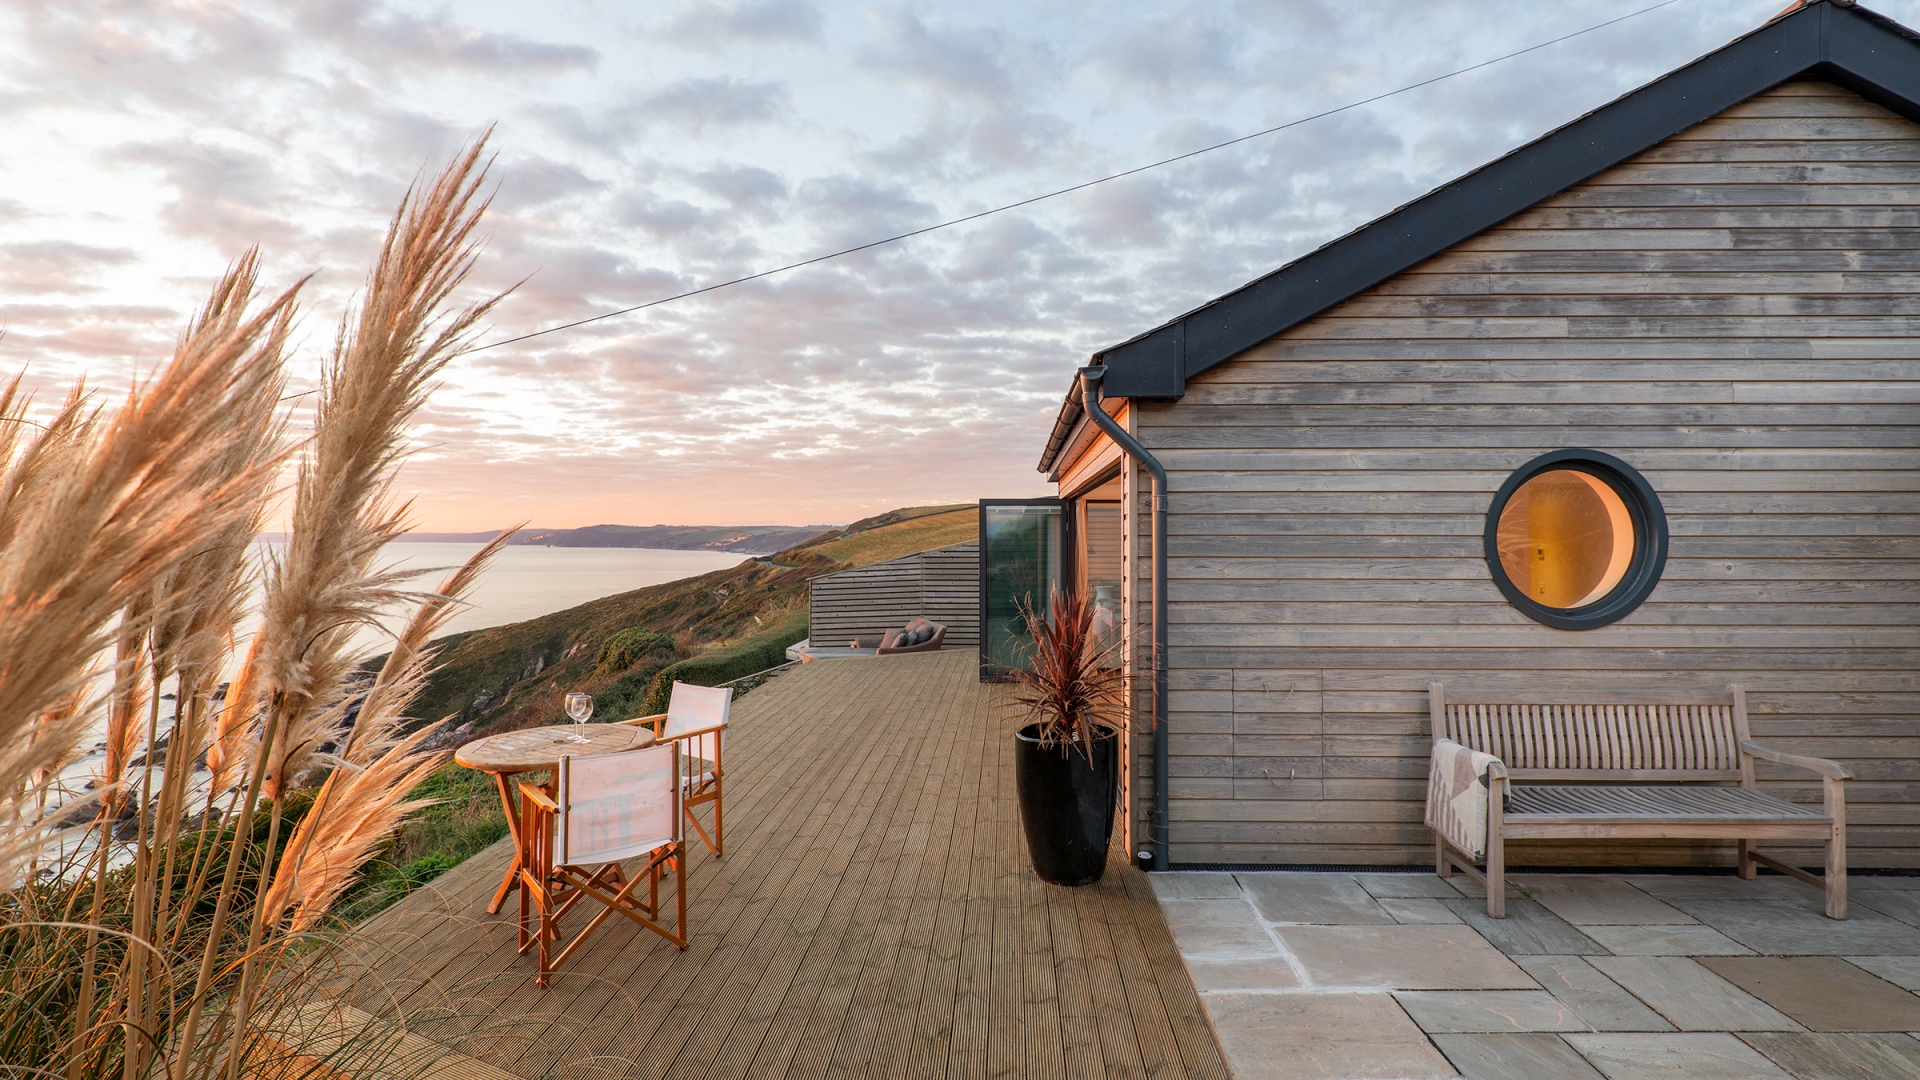 Airbnb’s most wish-listed UK design homes - from beach huts to cliffside cabins